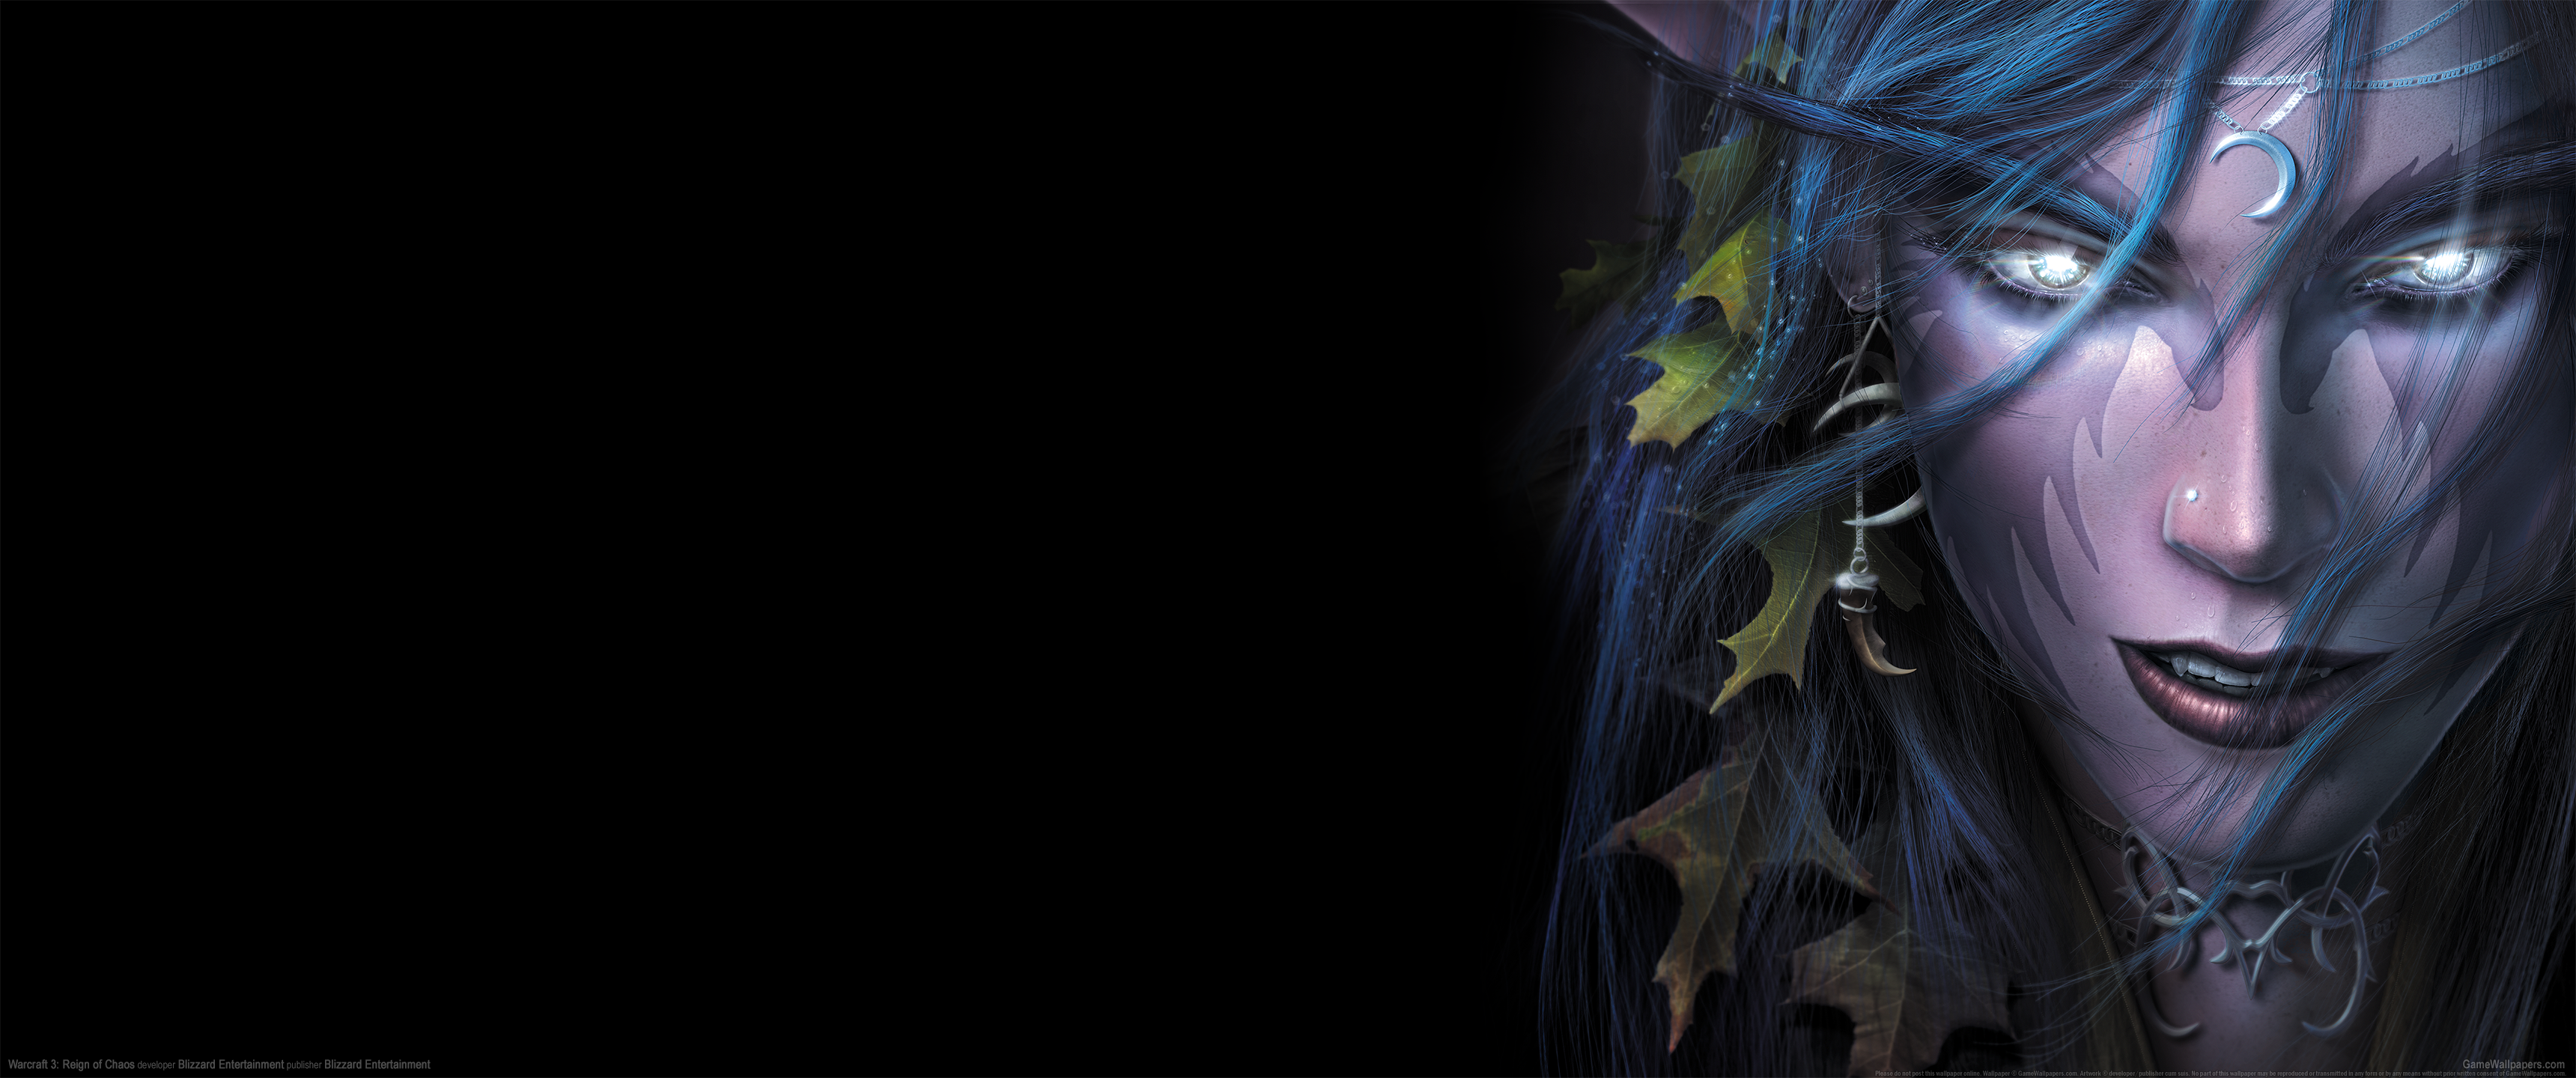 Warcraft 3: Reign of Chaos 3440x1440 wallpaper or background 23